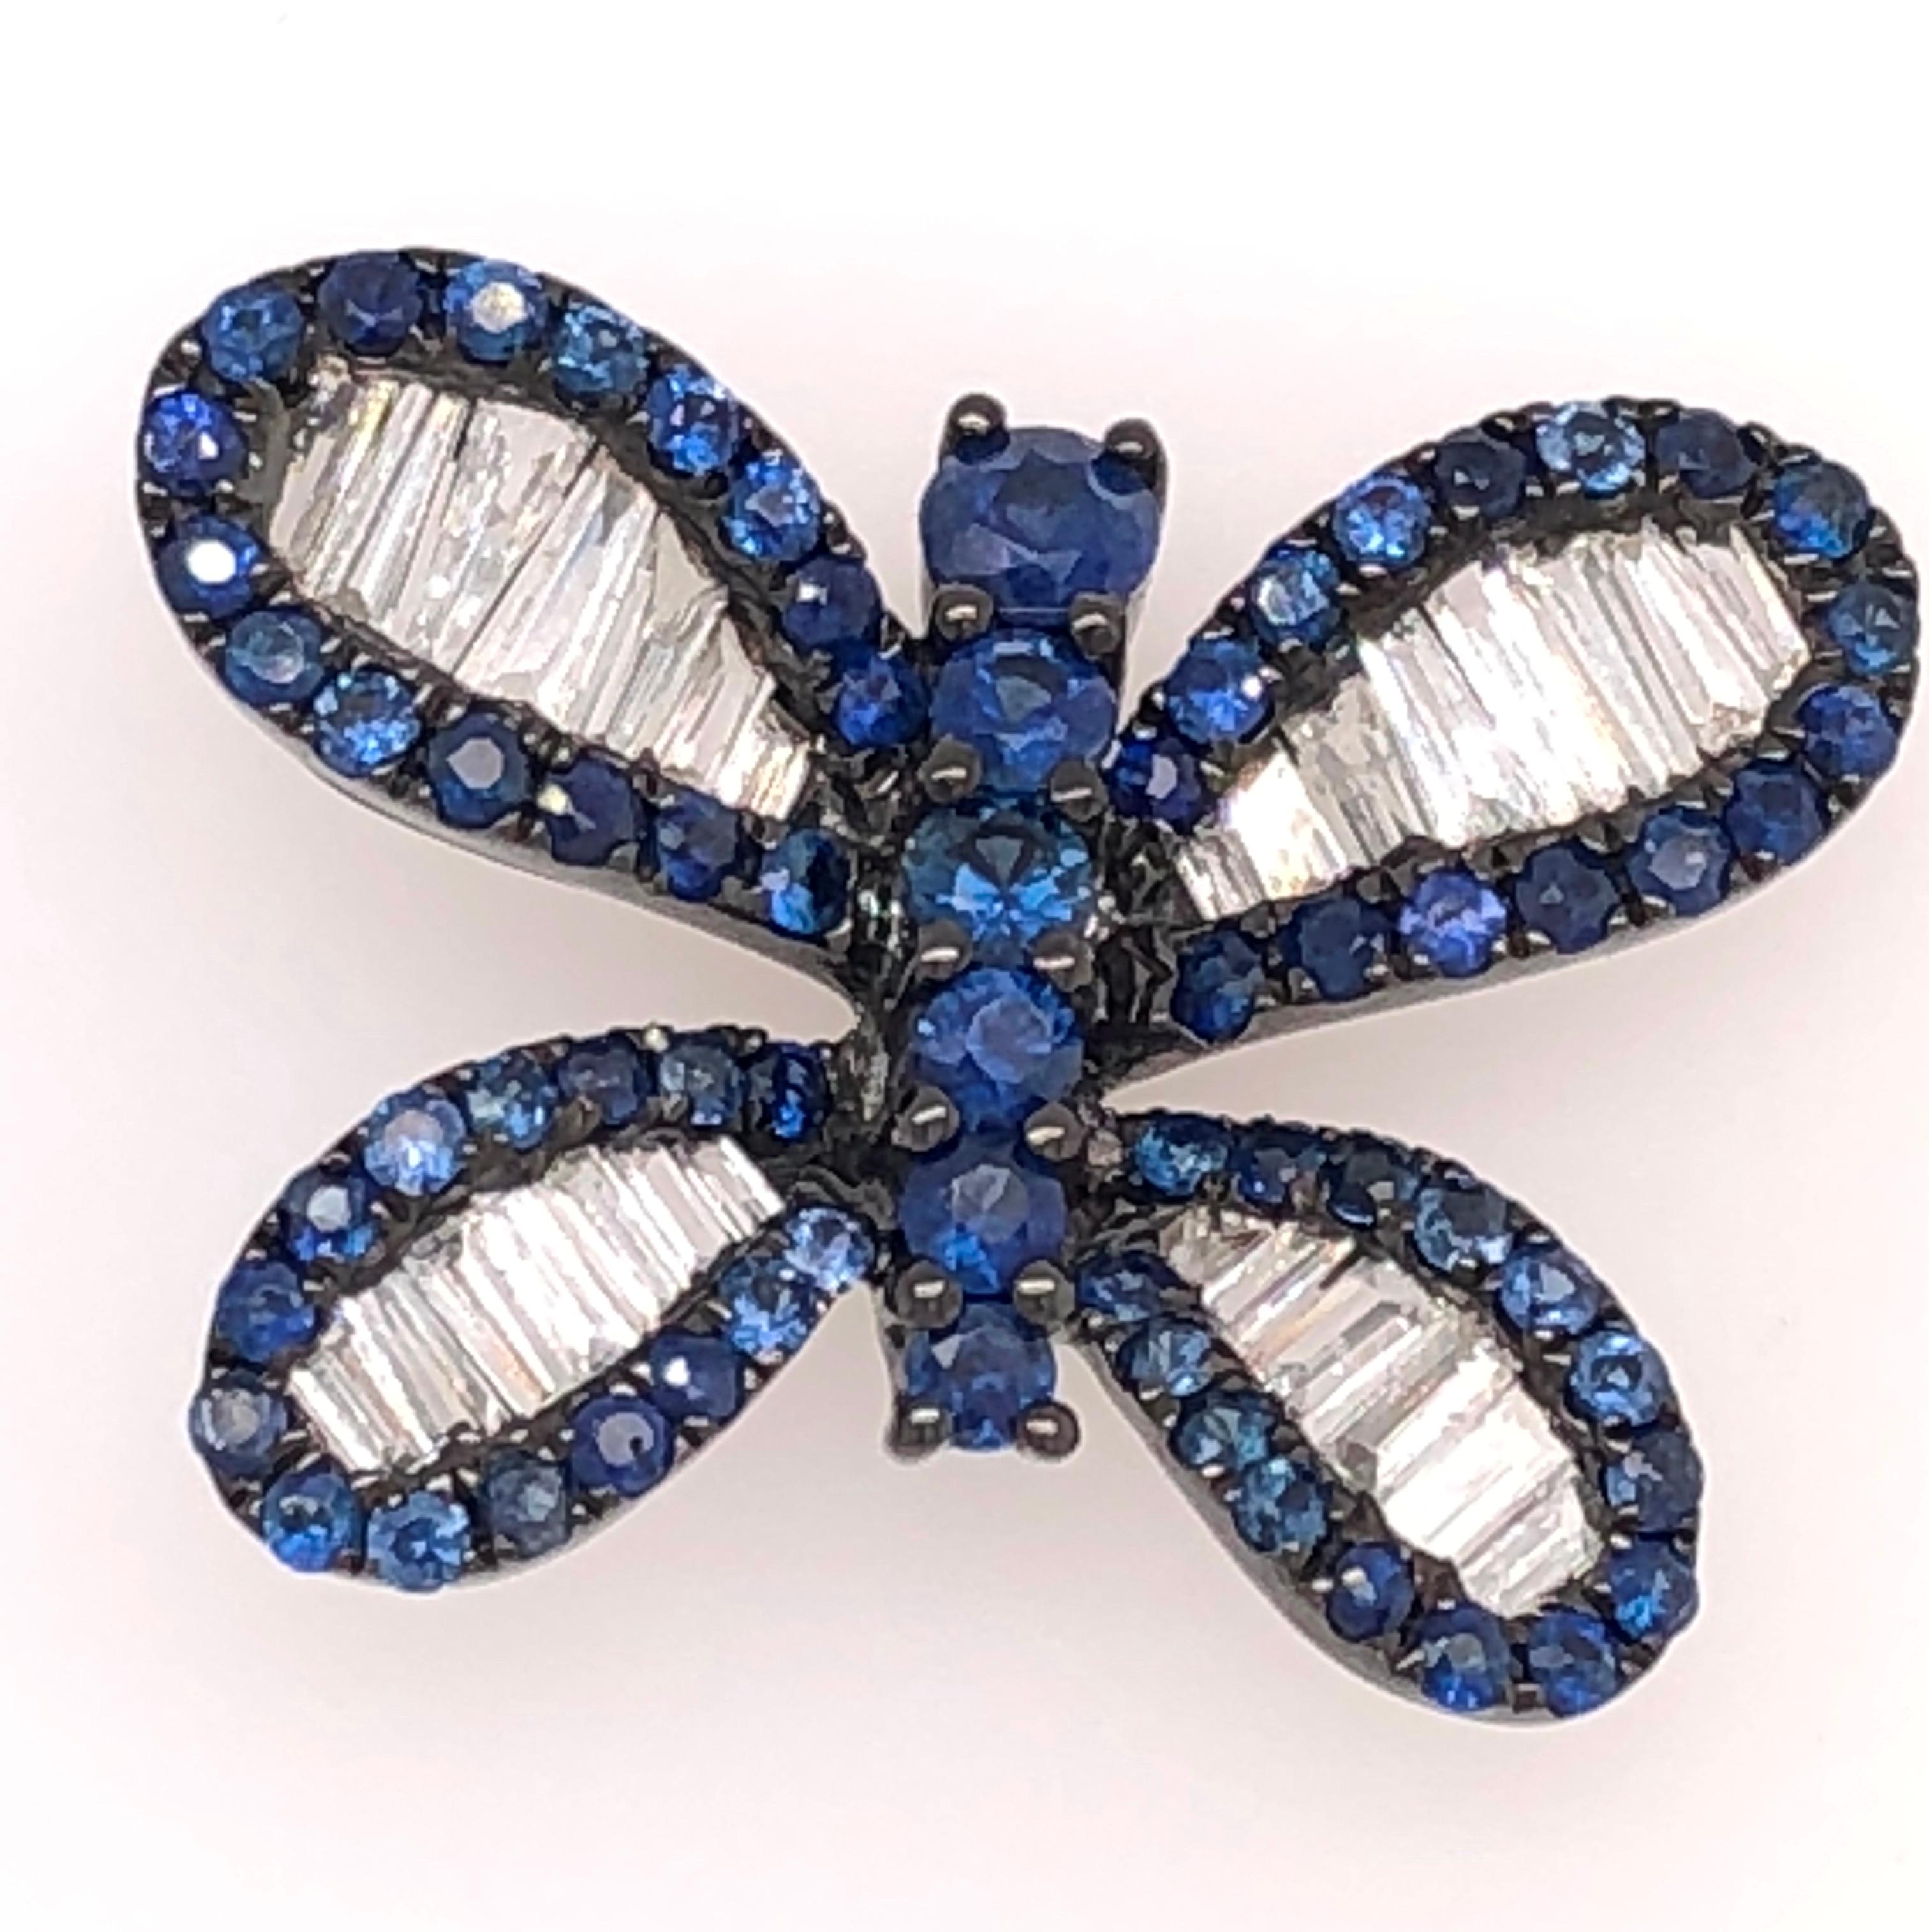 Midnight Blue Collection 

Butterfly shaped deep Blue Sapphires and baguette Diamond studs set in 18K black rhodium gold. 

Blue Sapphires: 1.34ct total weight.
Diamonds: 0.66ct total weight.
All diamonds are G-H/SI stones.
Width of butterfly -  is